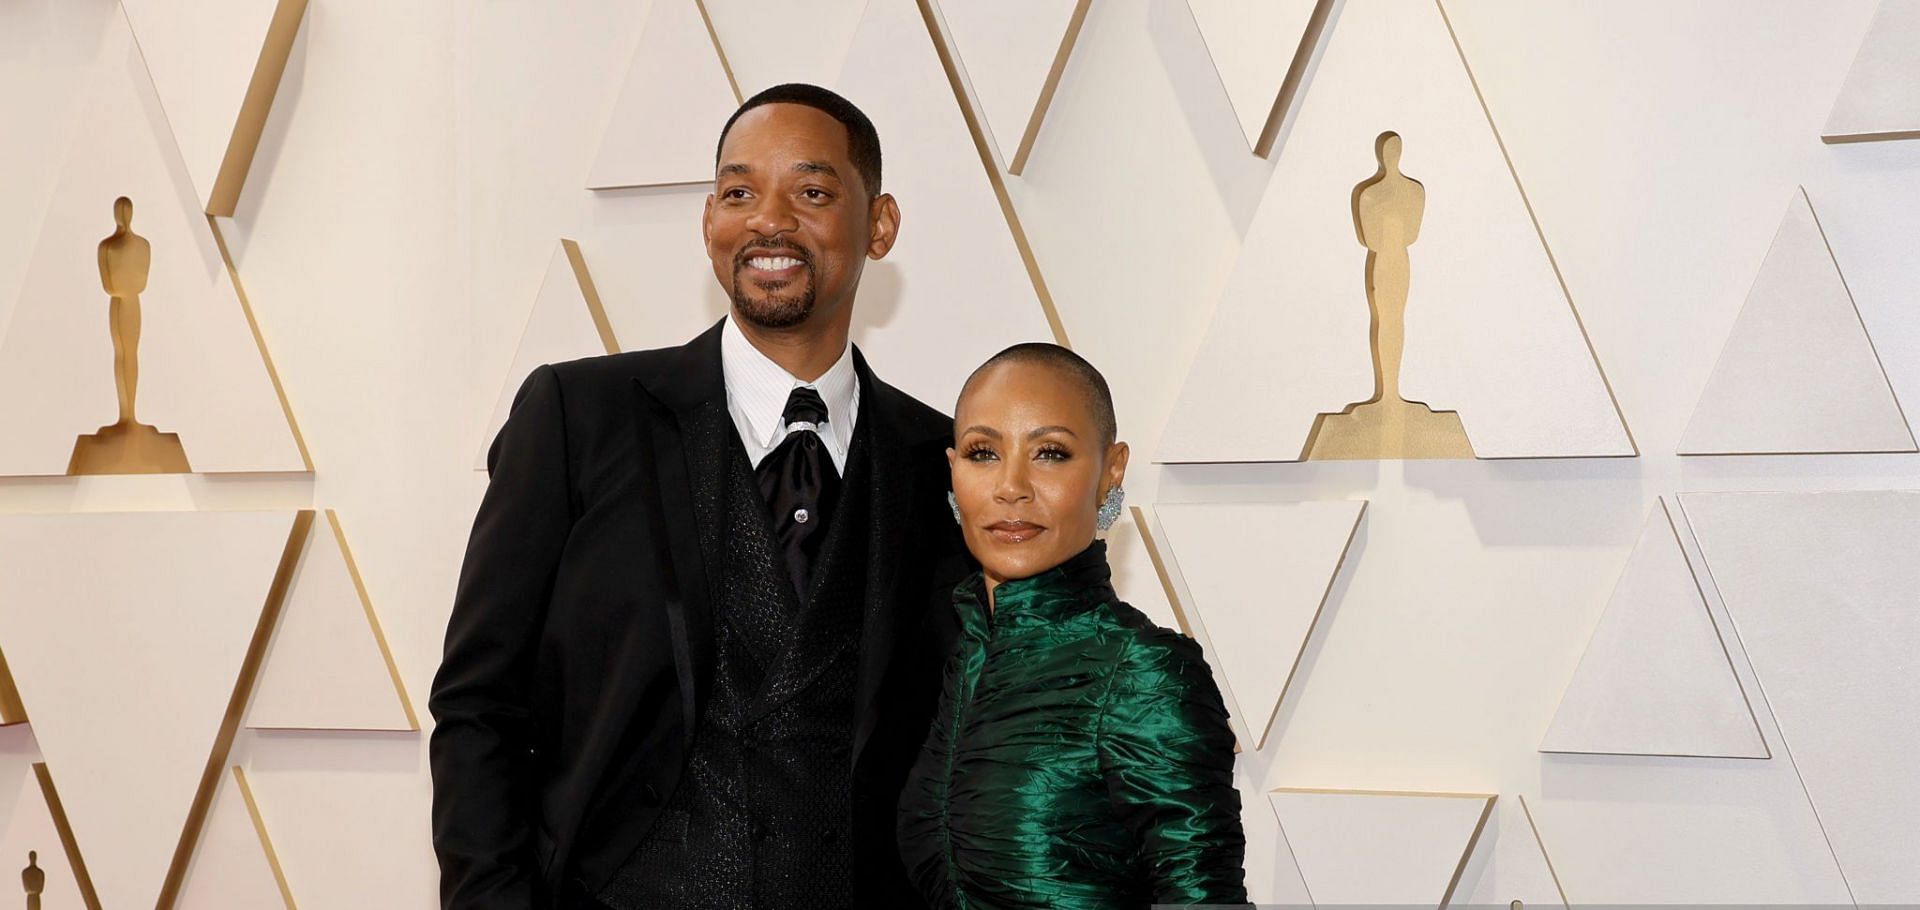 Jada Pinkett Smith claimed her mother &ldquo;forced&rdquo; her to get married to Will Smith (Image via Mike Coppola/Getty Images)